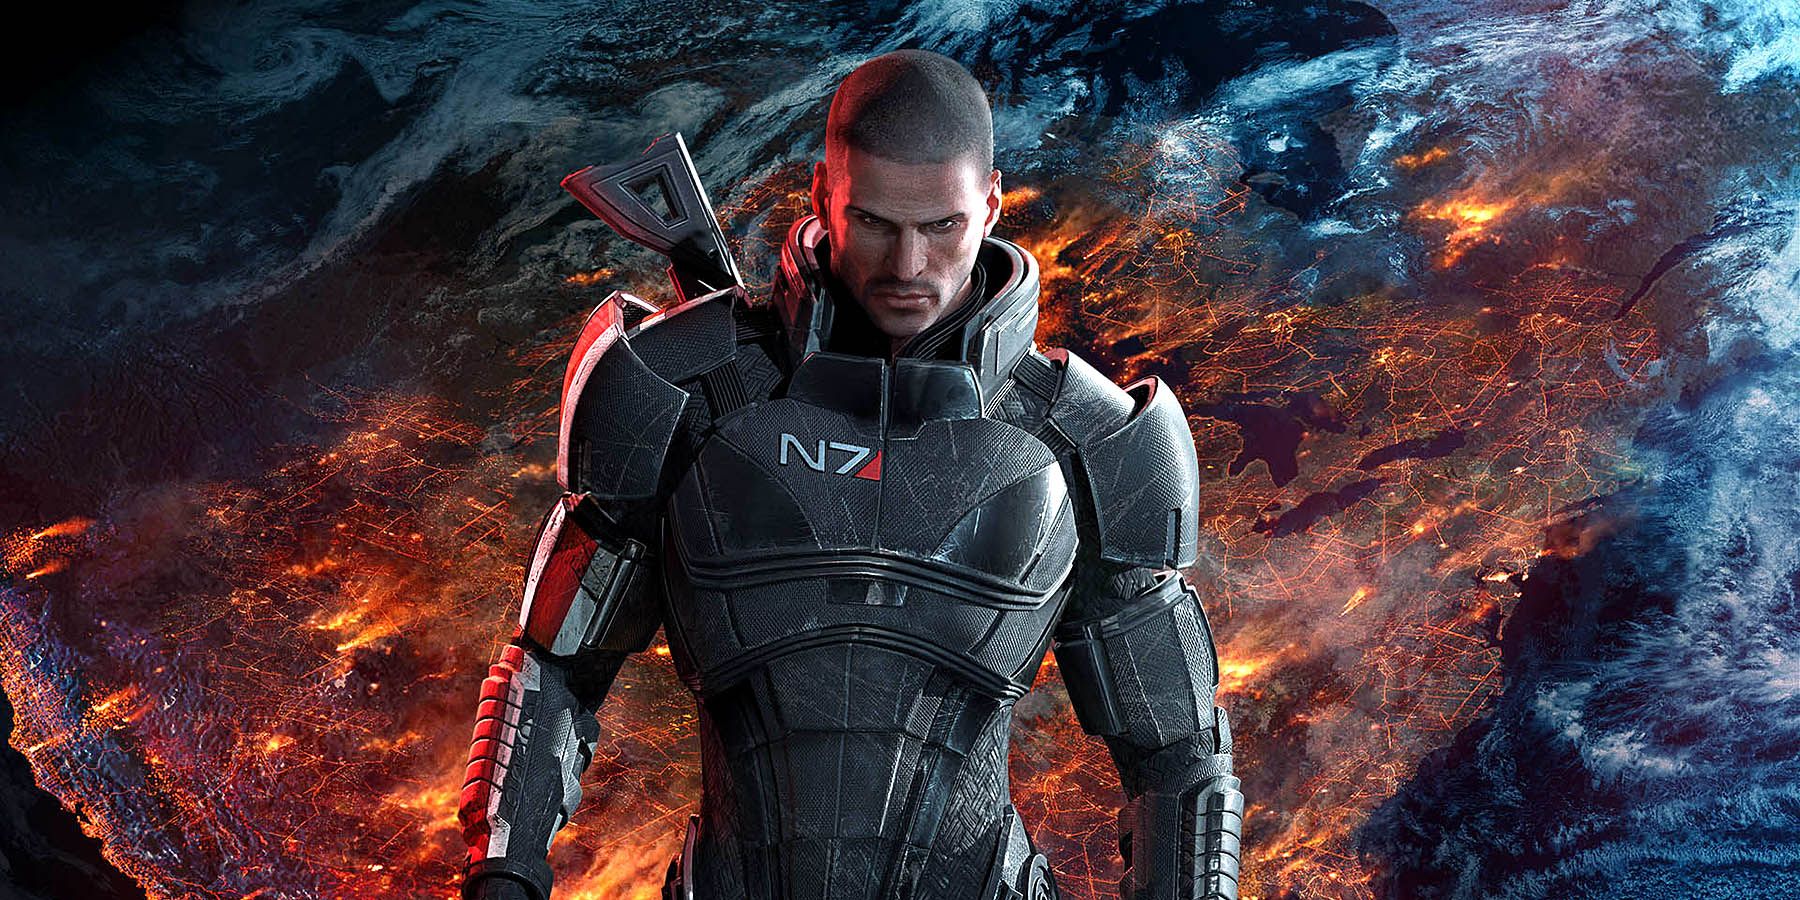 Mass Effect Shepard in front of burning planet